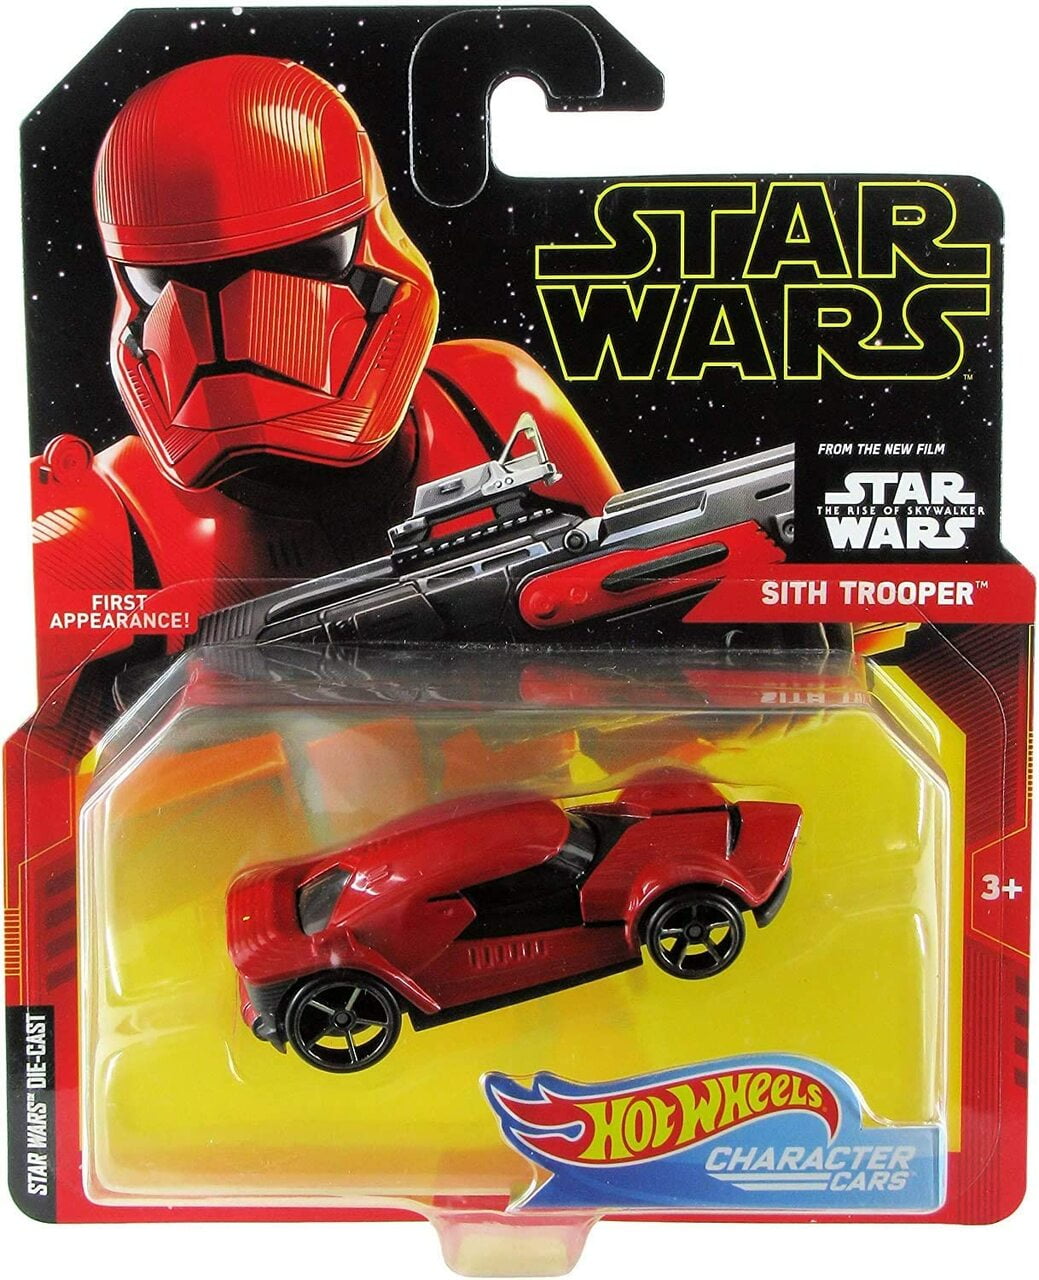 The Force  Awakens Vehicles Selections Hot Wheels Star Wars 